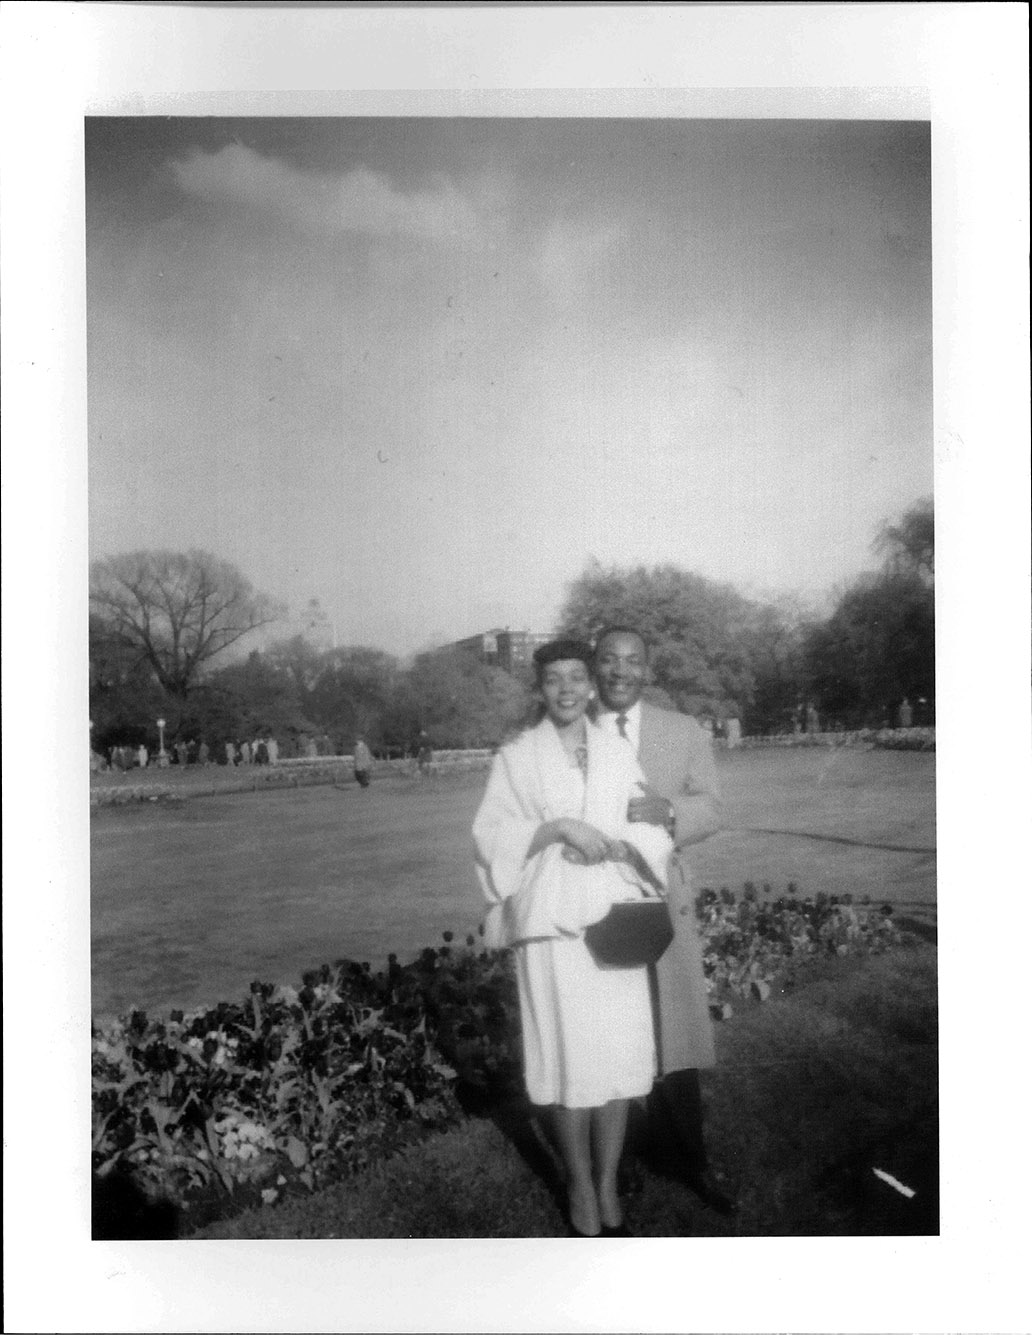 Photo: black and white photo of Martin Luther King Jr. and his future wife Coretta Scott, posing in a scenic park. A Black mean wearing a suit, tie, and coat, smiles and poses behind a Black woman wearing a white jacket and skirt.